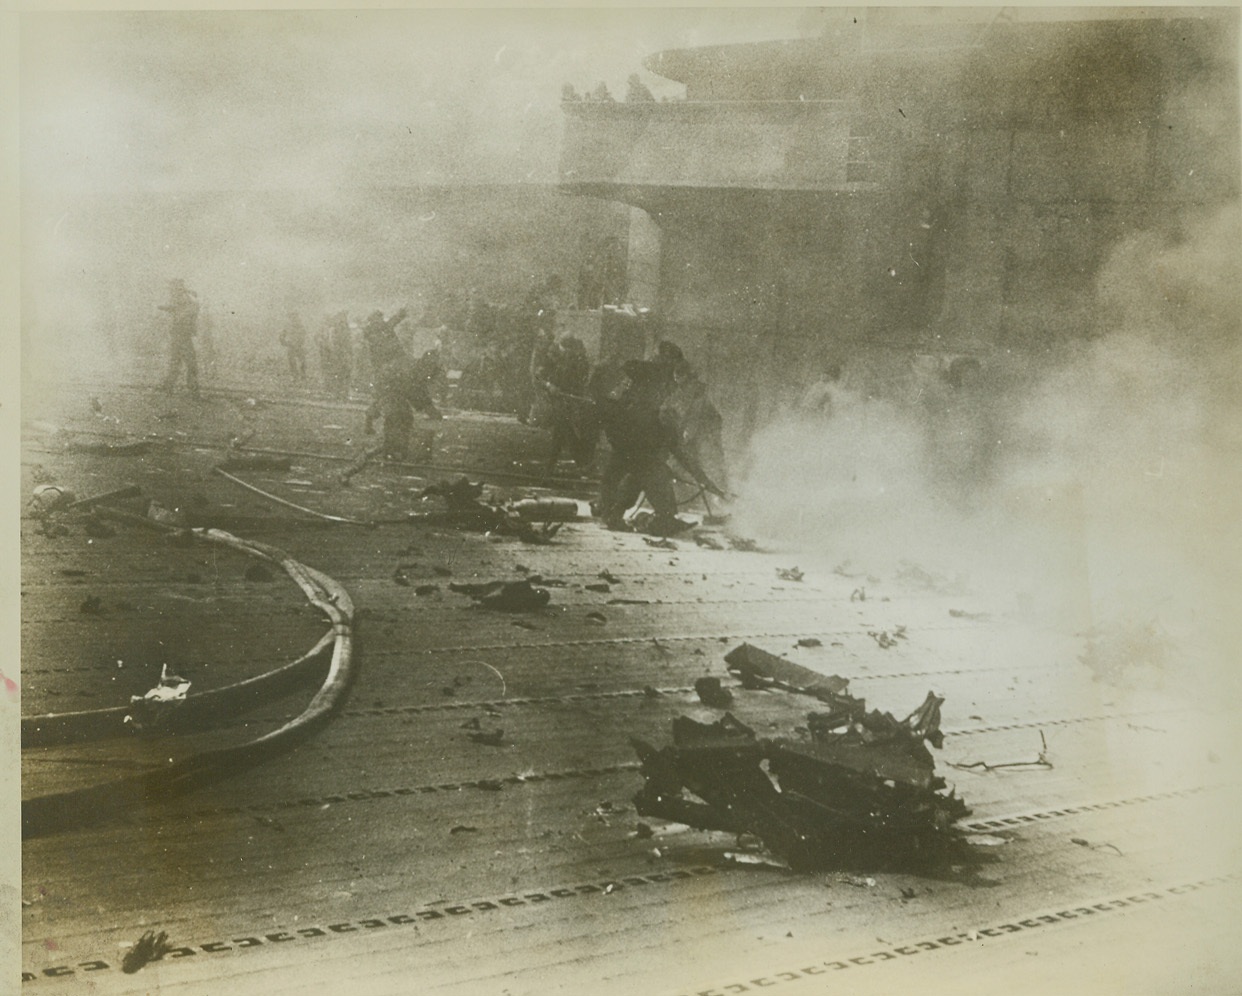 After Jap Plane Hit "Hornet's" Deck, 1/12/1943. Crew members of the U.S. aircraft carrier Hornet, battle desperately against long odds to put out a fire started when a Jap bomber suicide-dived into the warship's signal bridge, in this photo released by the Navy in Washington today. Wreckage from the bomber covers the ship's flight deck. Picture was taken during the battle of the Santa Cruz Islands, Oct. 26, 1942, when the carrier was so badly damaged it later had both sunk by other American warships. Credit: (U.S. Navy Photo from ACME);